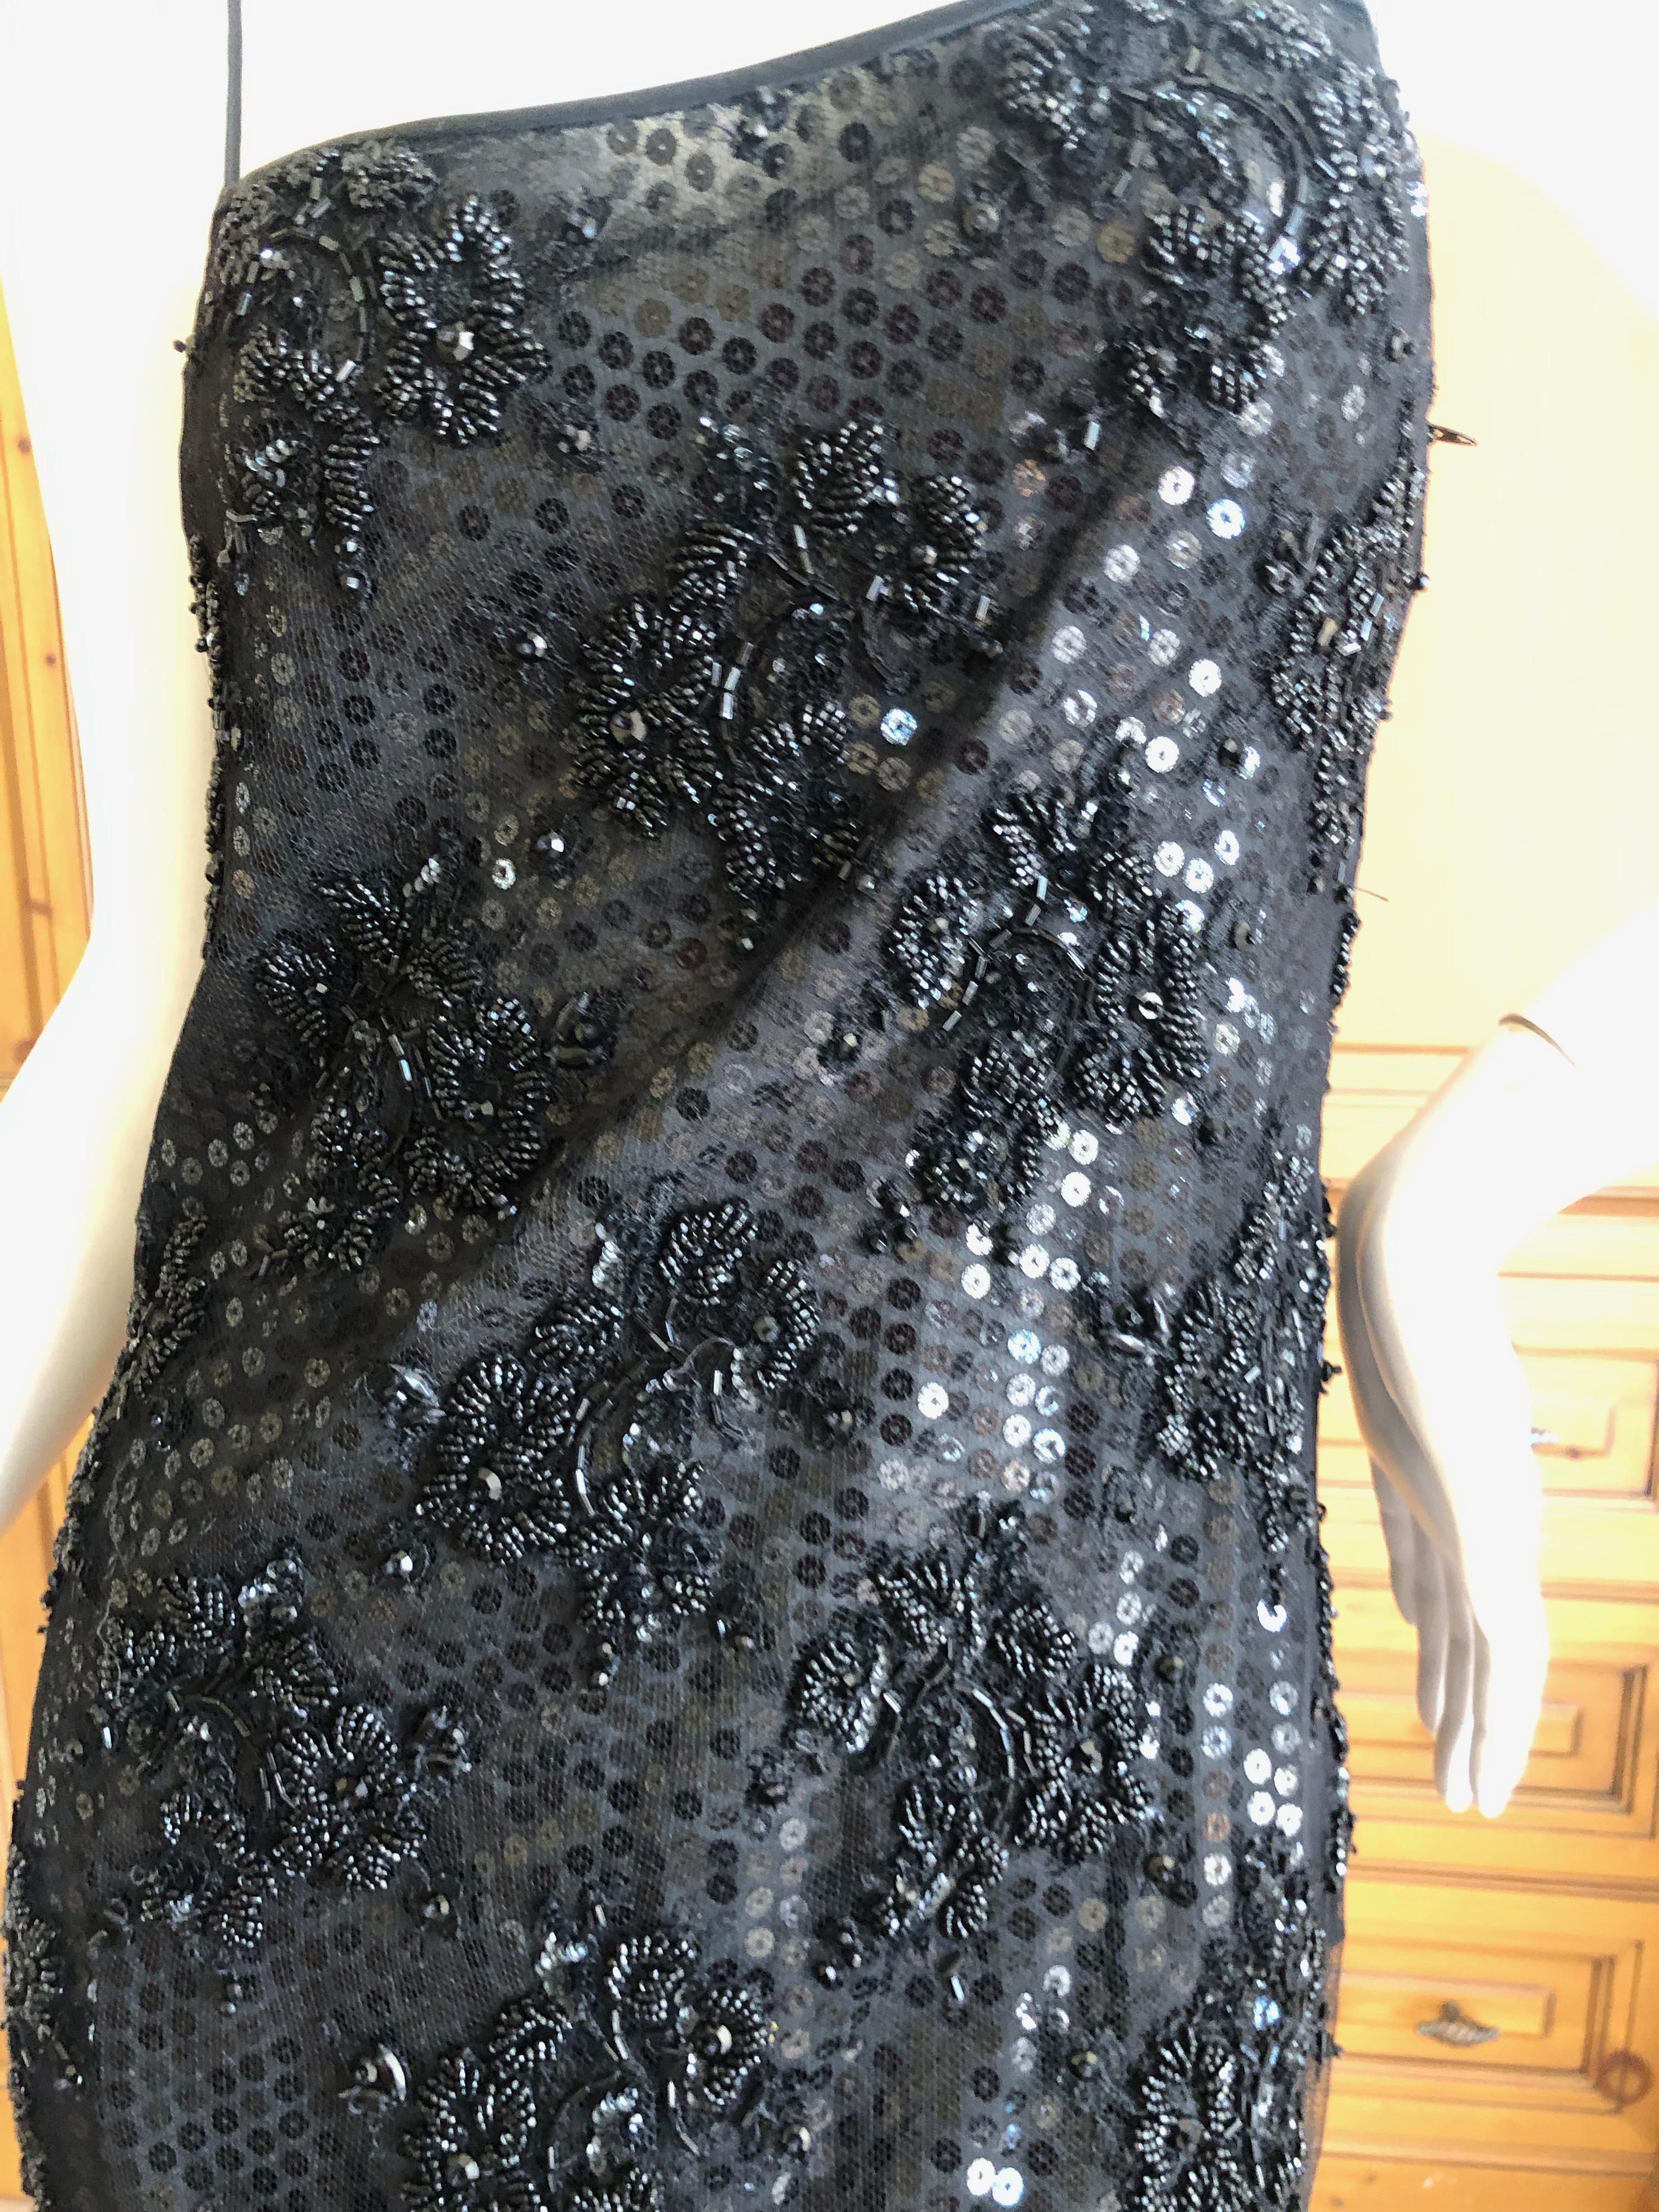  Galanos Superb Sequin and Hand Beaded Lace Little Black Mini Dress In Excellent Condition For Sale In Cloverdale, CA